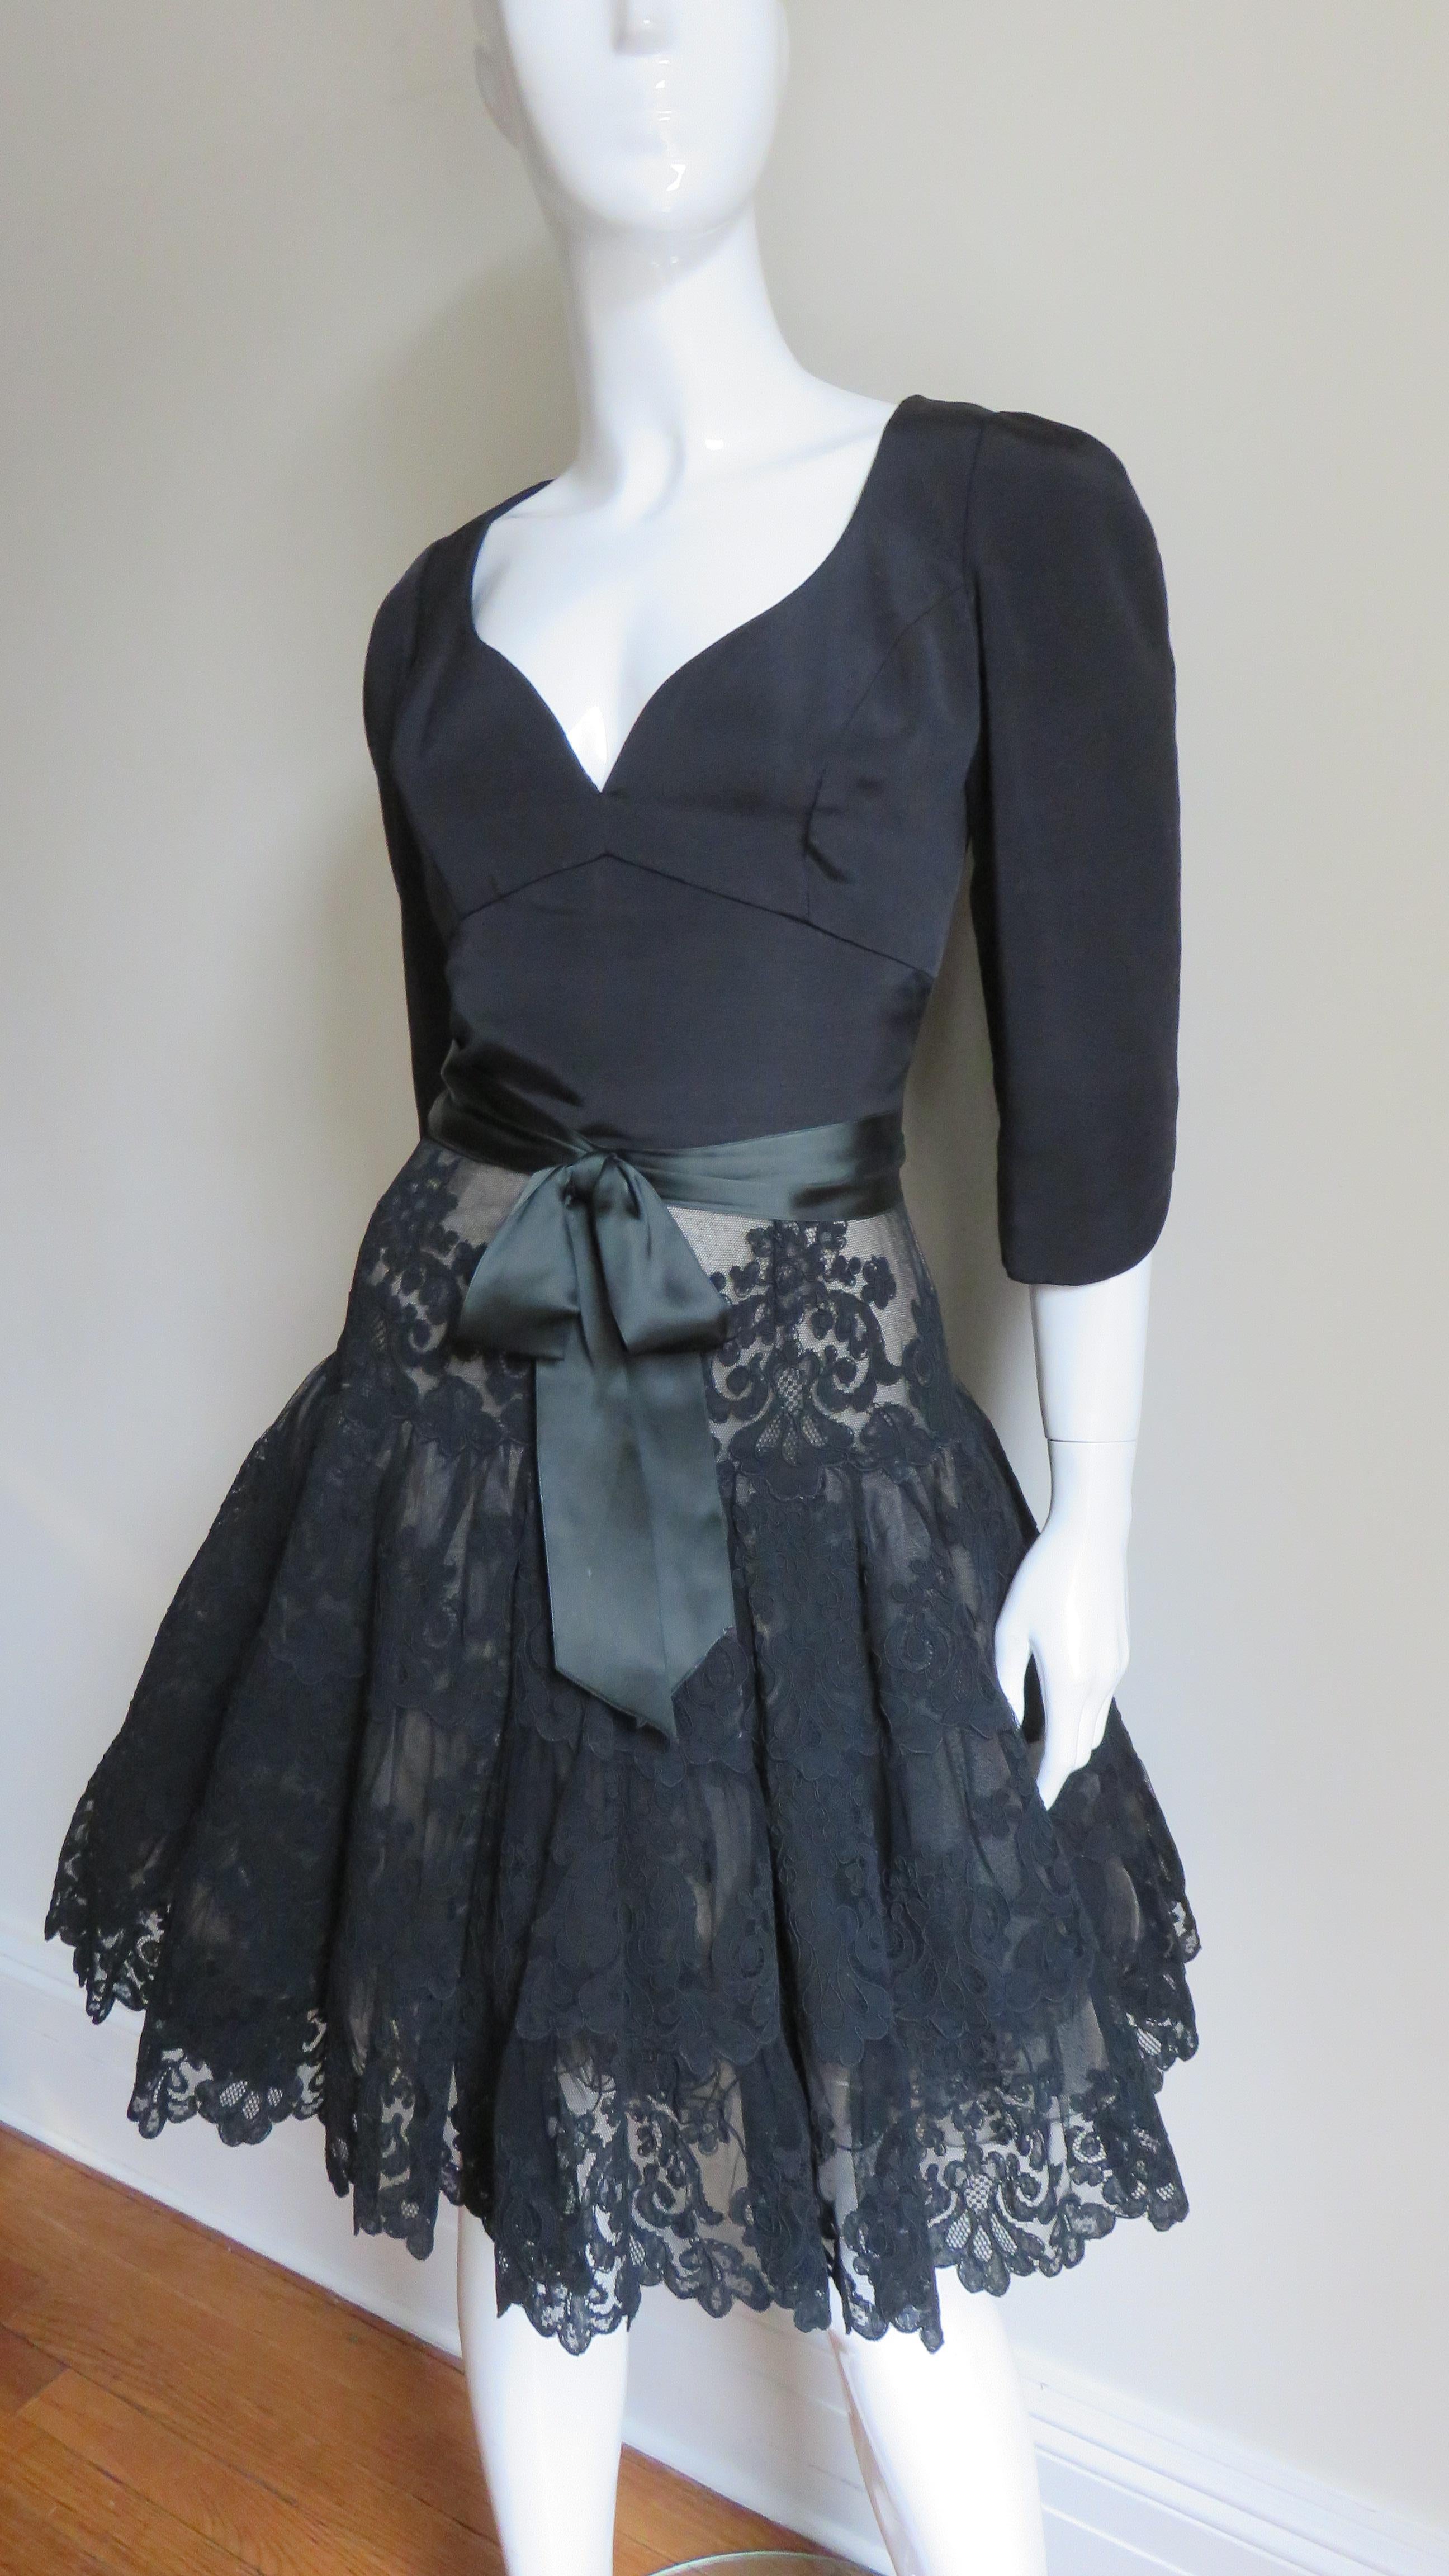 A gorgeous black silk and lace full skirted dress by Vicky Tiel.  It has a fitted silk bodice with a sweetheart neckline and notched elbow length sleeves.  The full skirt's top layer is beautifully detailed black lace with a scallop hemline and 4